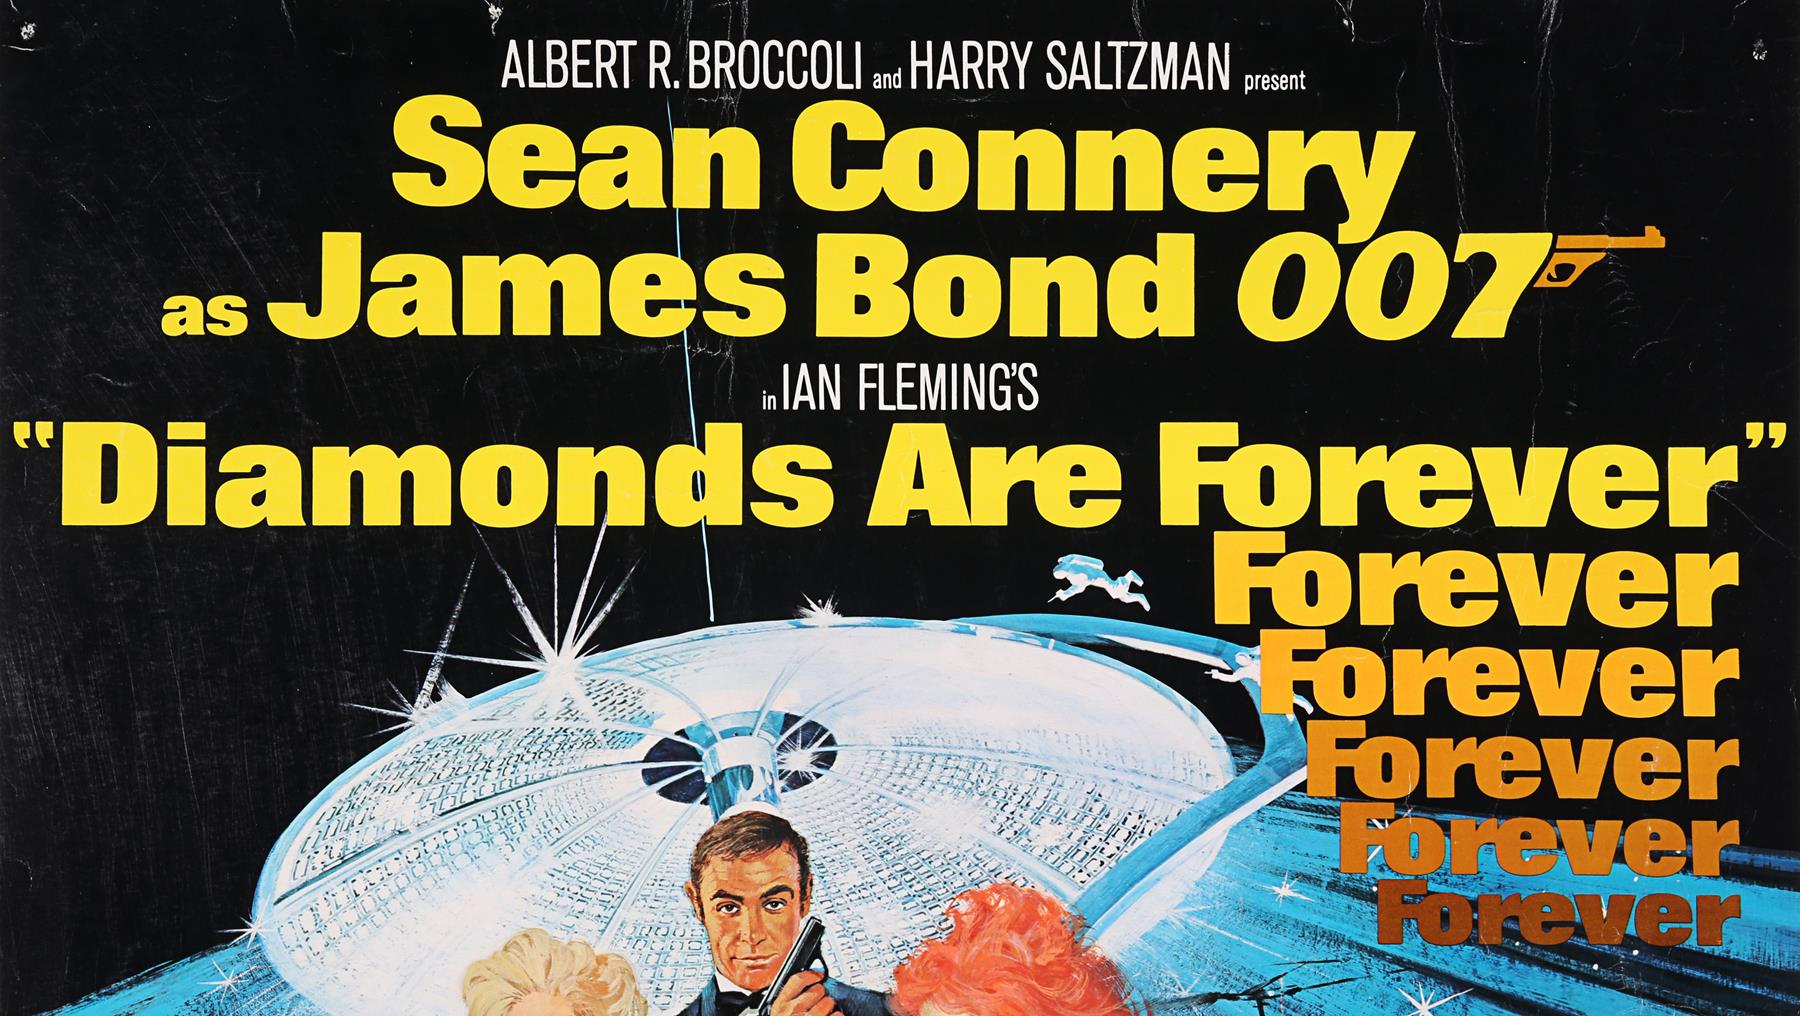 DIAMONDS ARE FOREVER (1971) - US 30x40 Poster, 1971 - Image 3 of 7